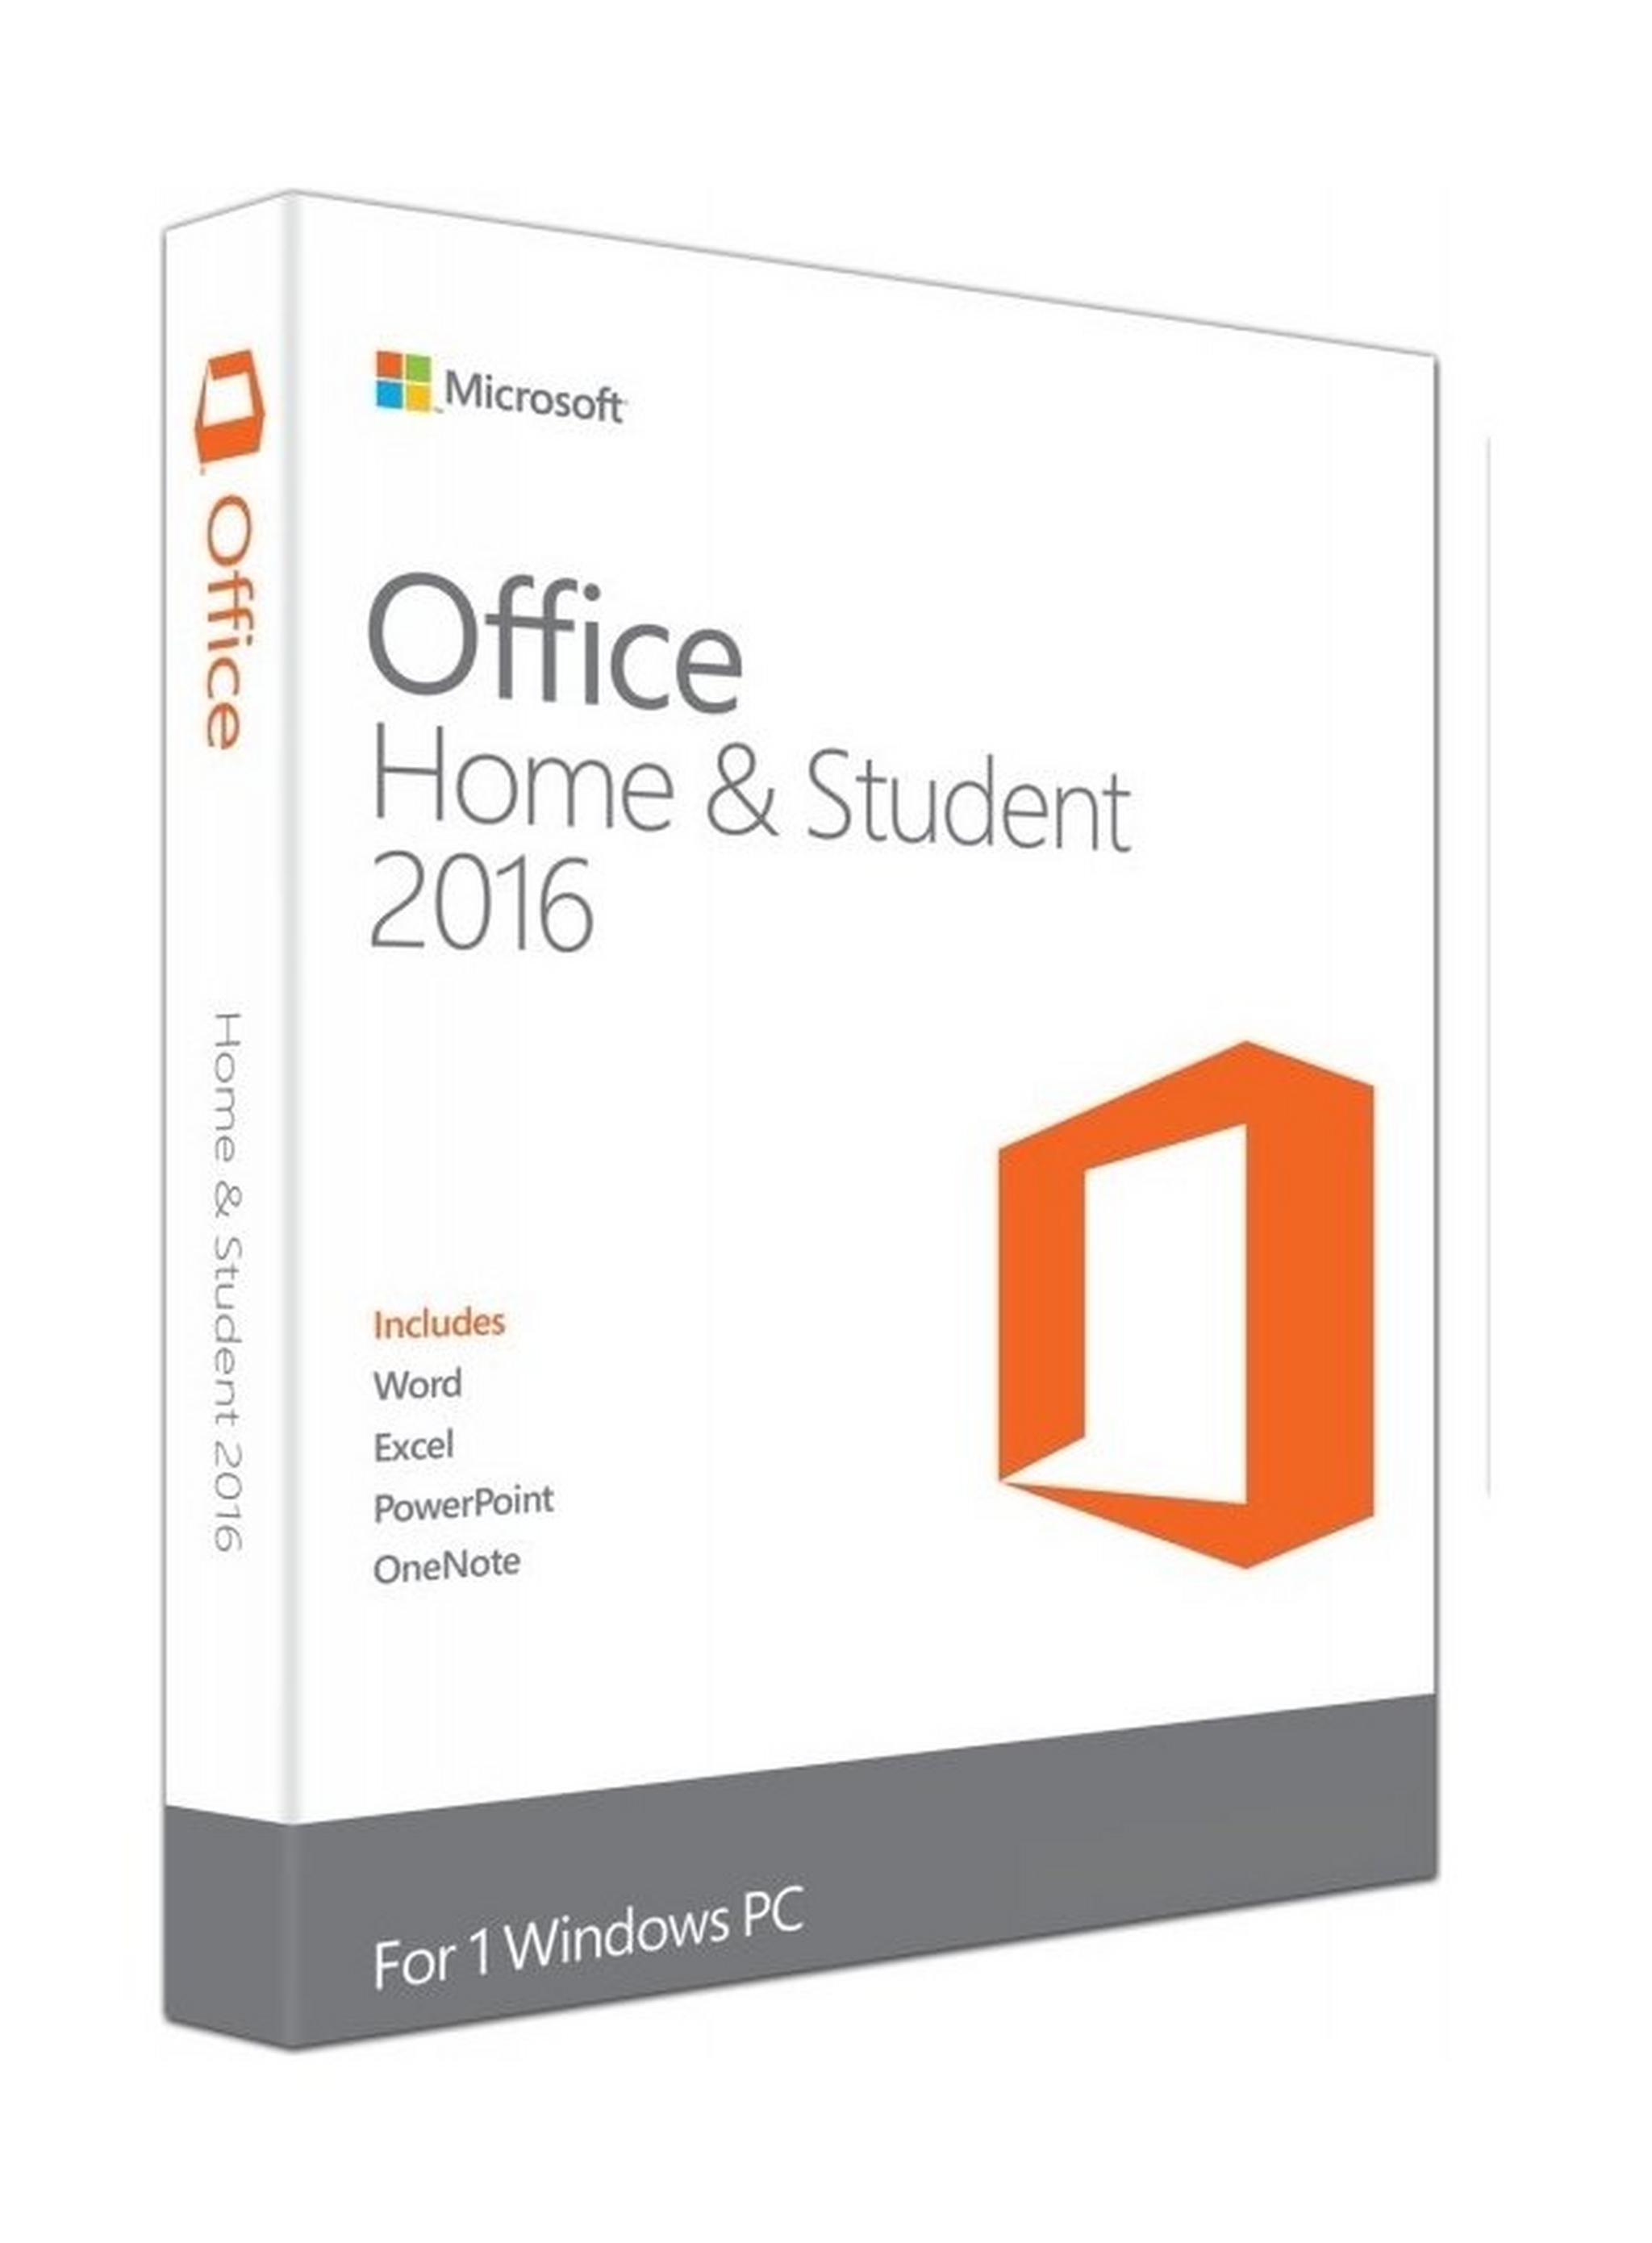 Microsoft Office Home & Student 2016 for Windows PC English - (79G-04604)